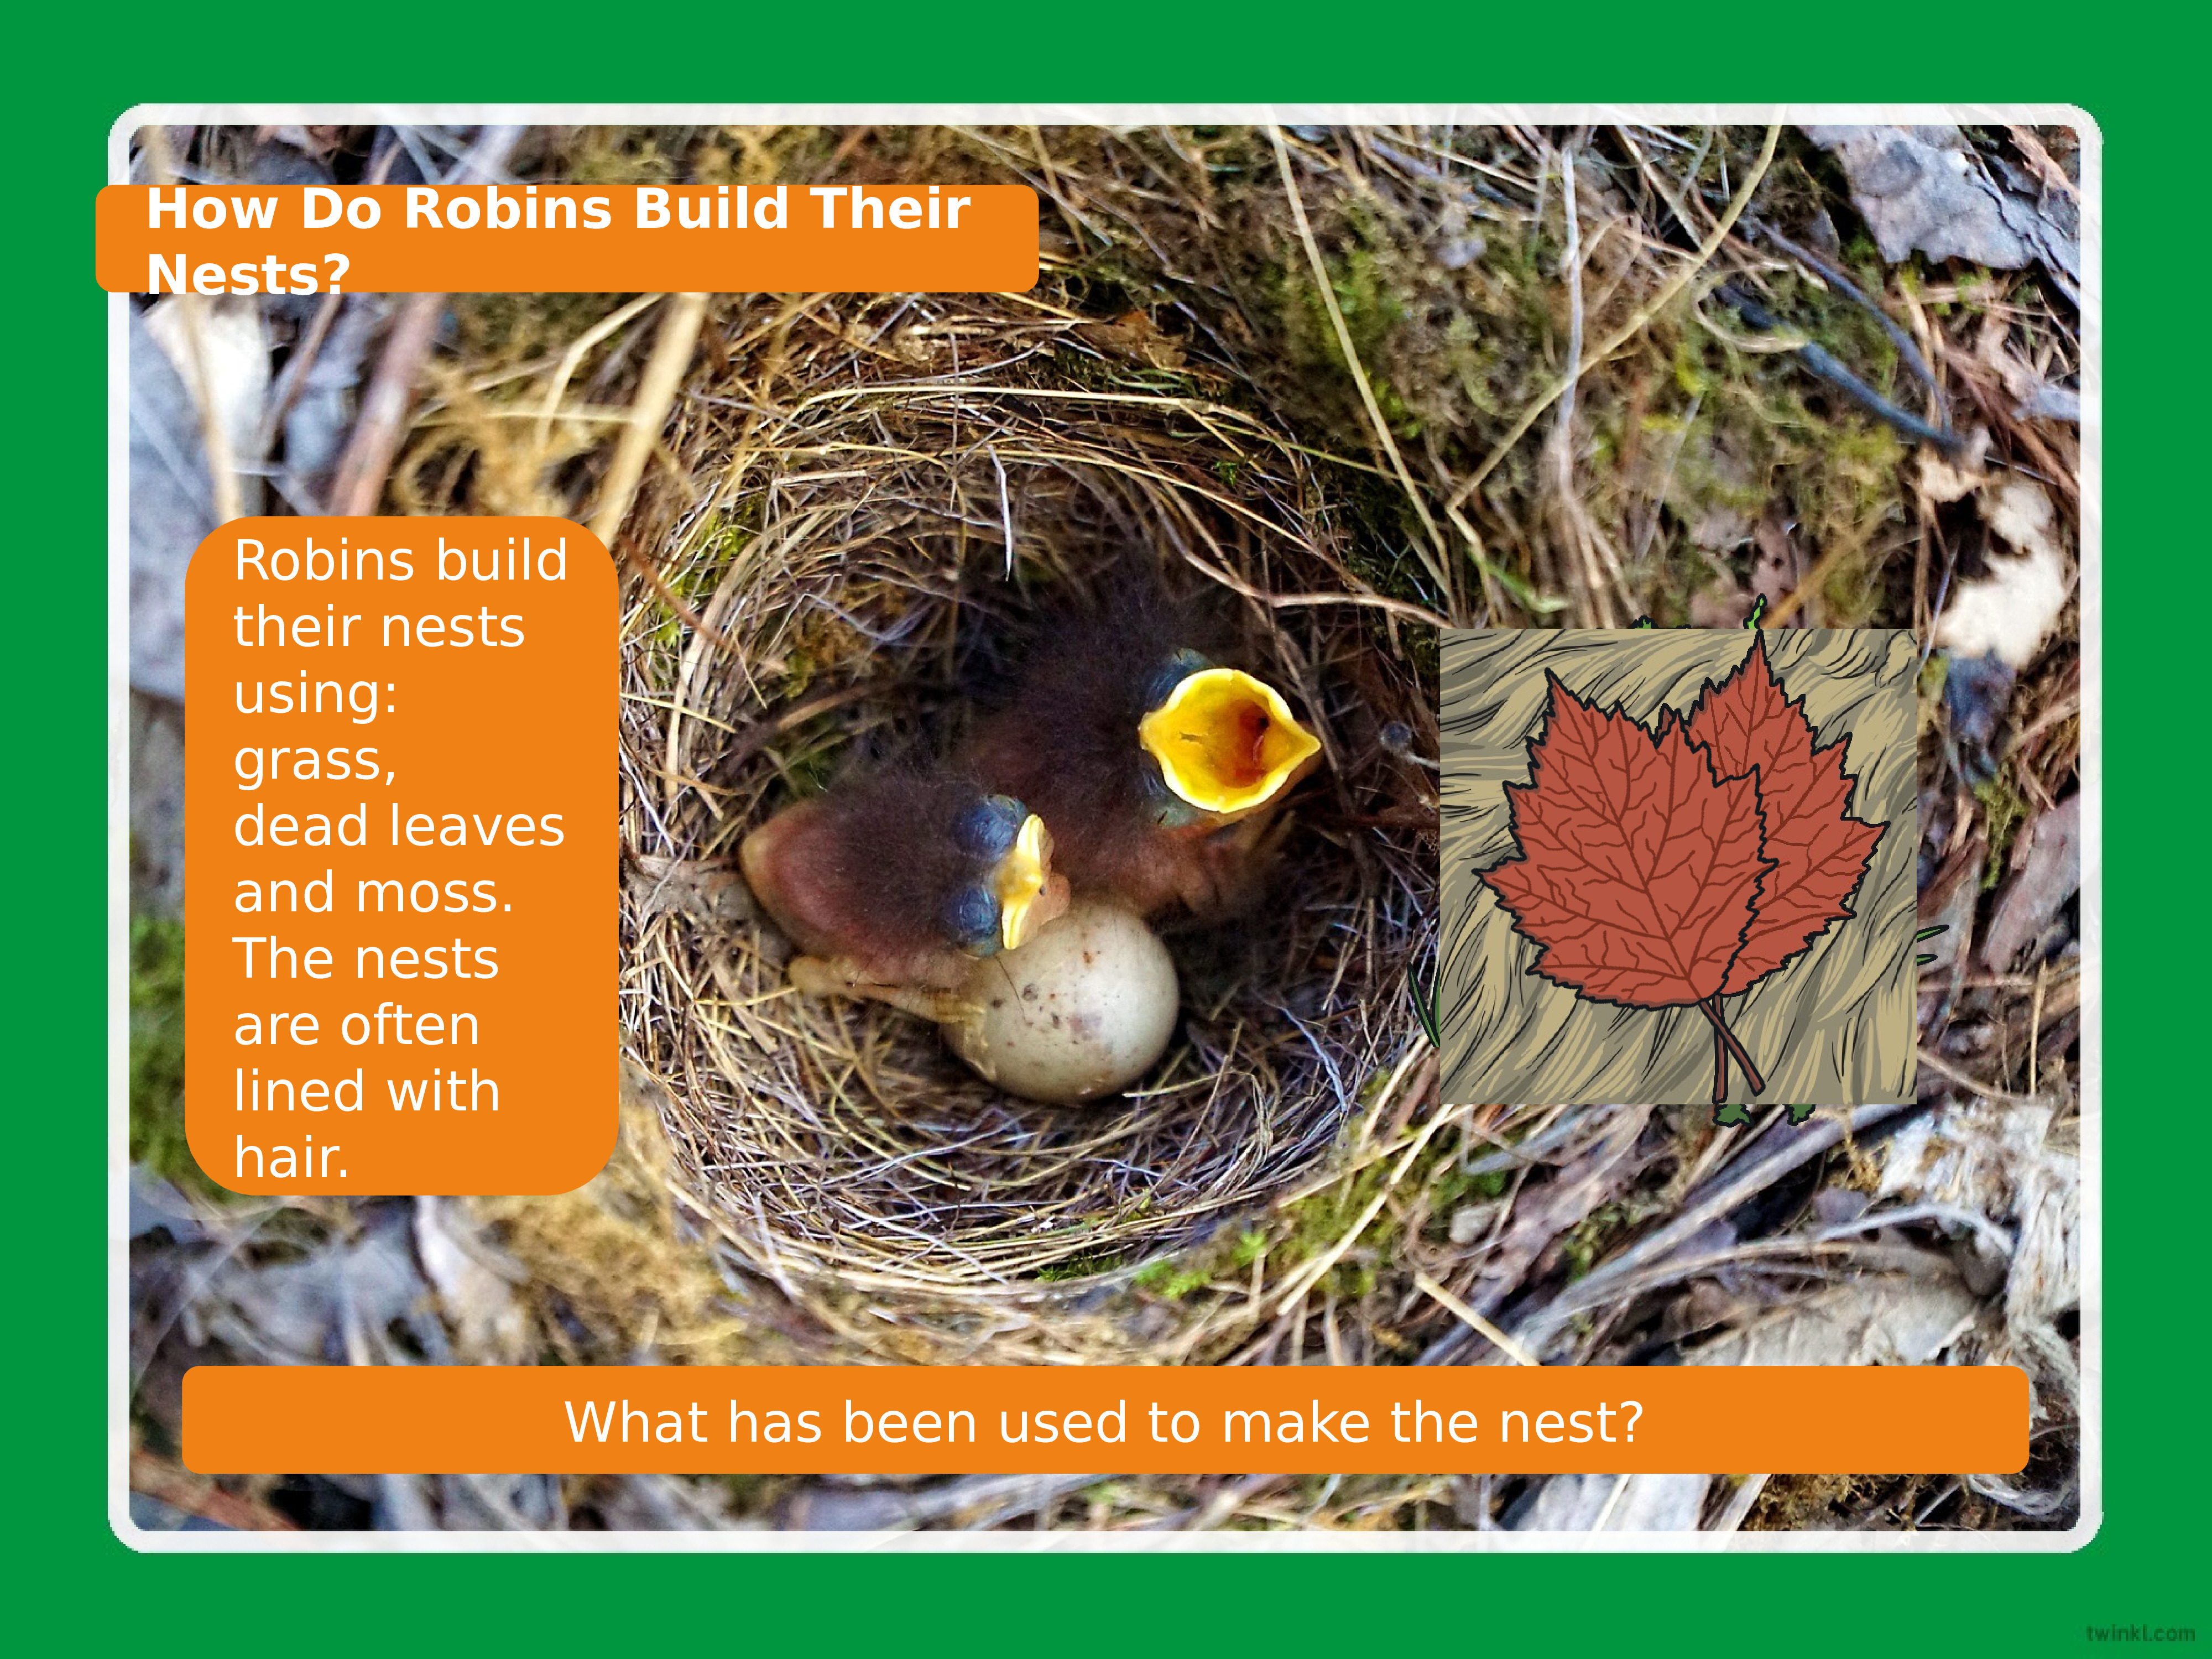 Their nests. Robins Drive other Robins from Nest. American Robin build Nest. Birds in their little Nests agree пословица перевод.